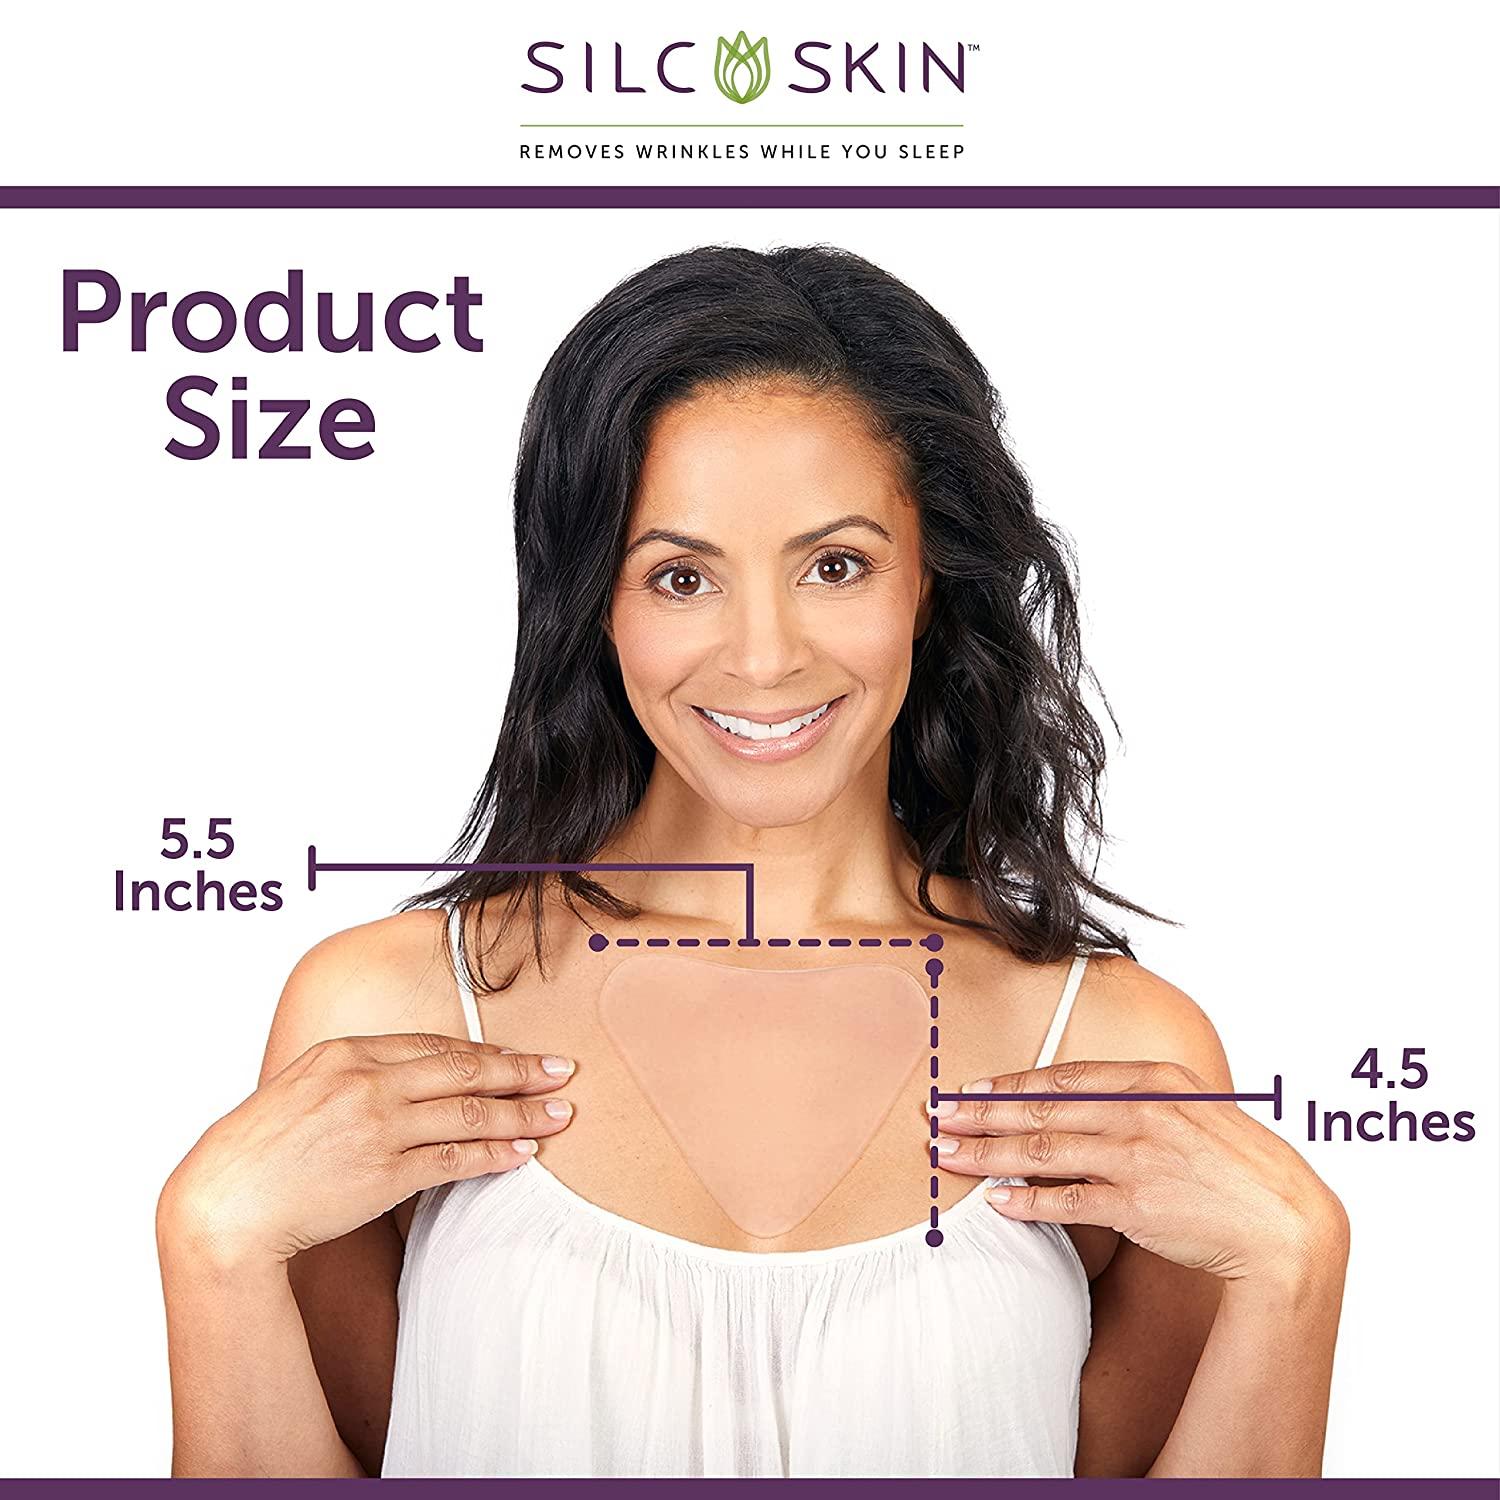 SilcSkin Decollette Pad to Help with Chest Wrinkles from Sun, Aging, Side  Sleeping, Reusable Self Adhesive Medical Grade Silicone, 1 Pad SilcSkin  Decollette Pad, 1 pad